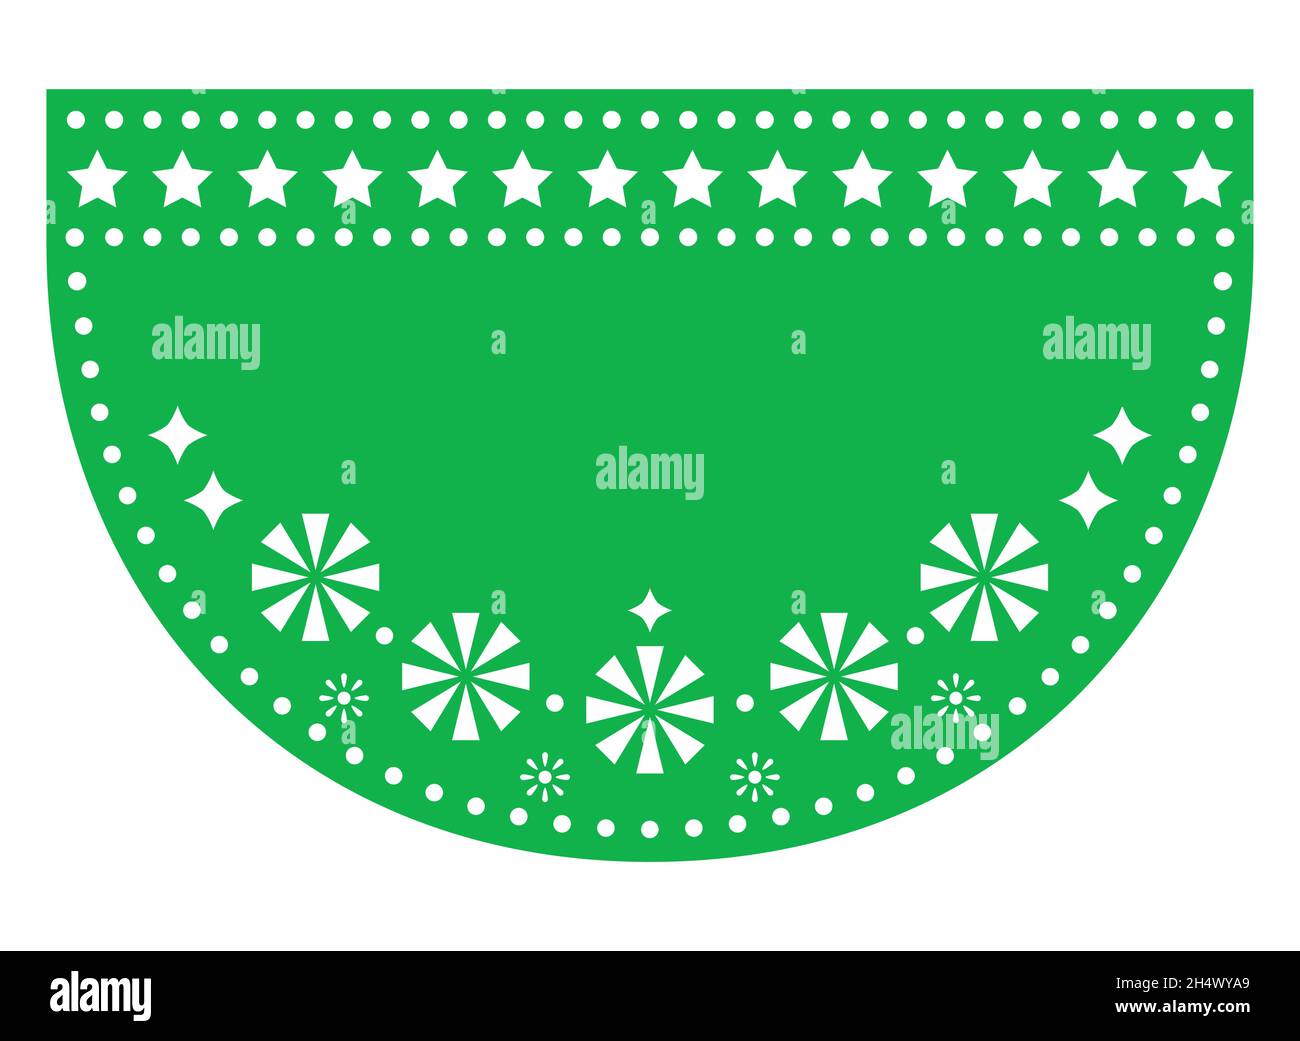 Papel Picado vector blank template half circle design, floral green round pattern with flowers, retro Mexican paper decorations pattern Stock Vector